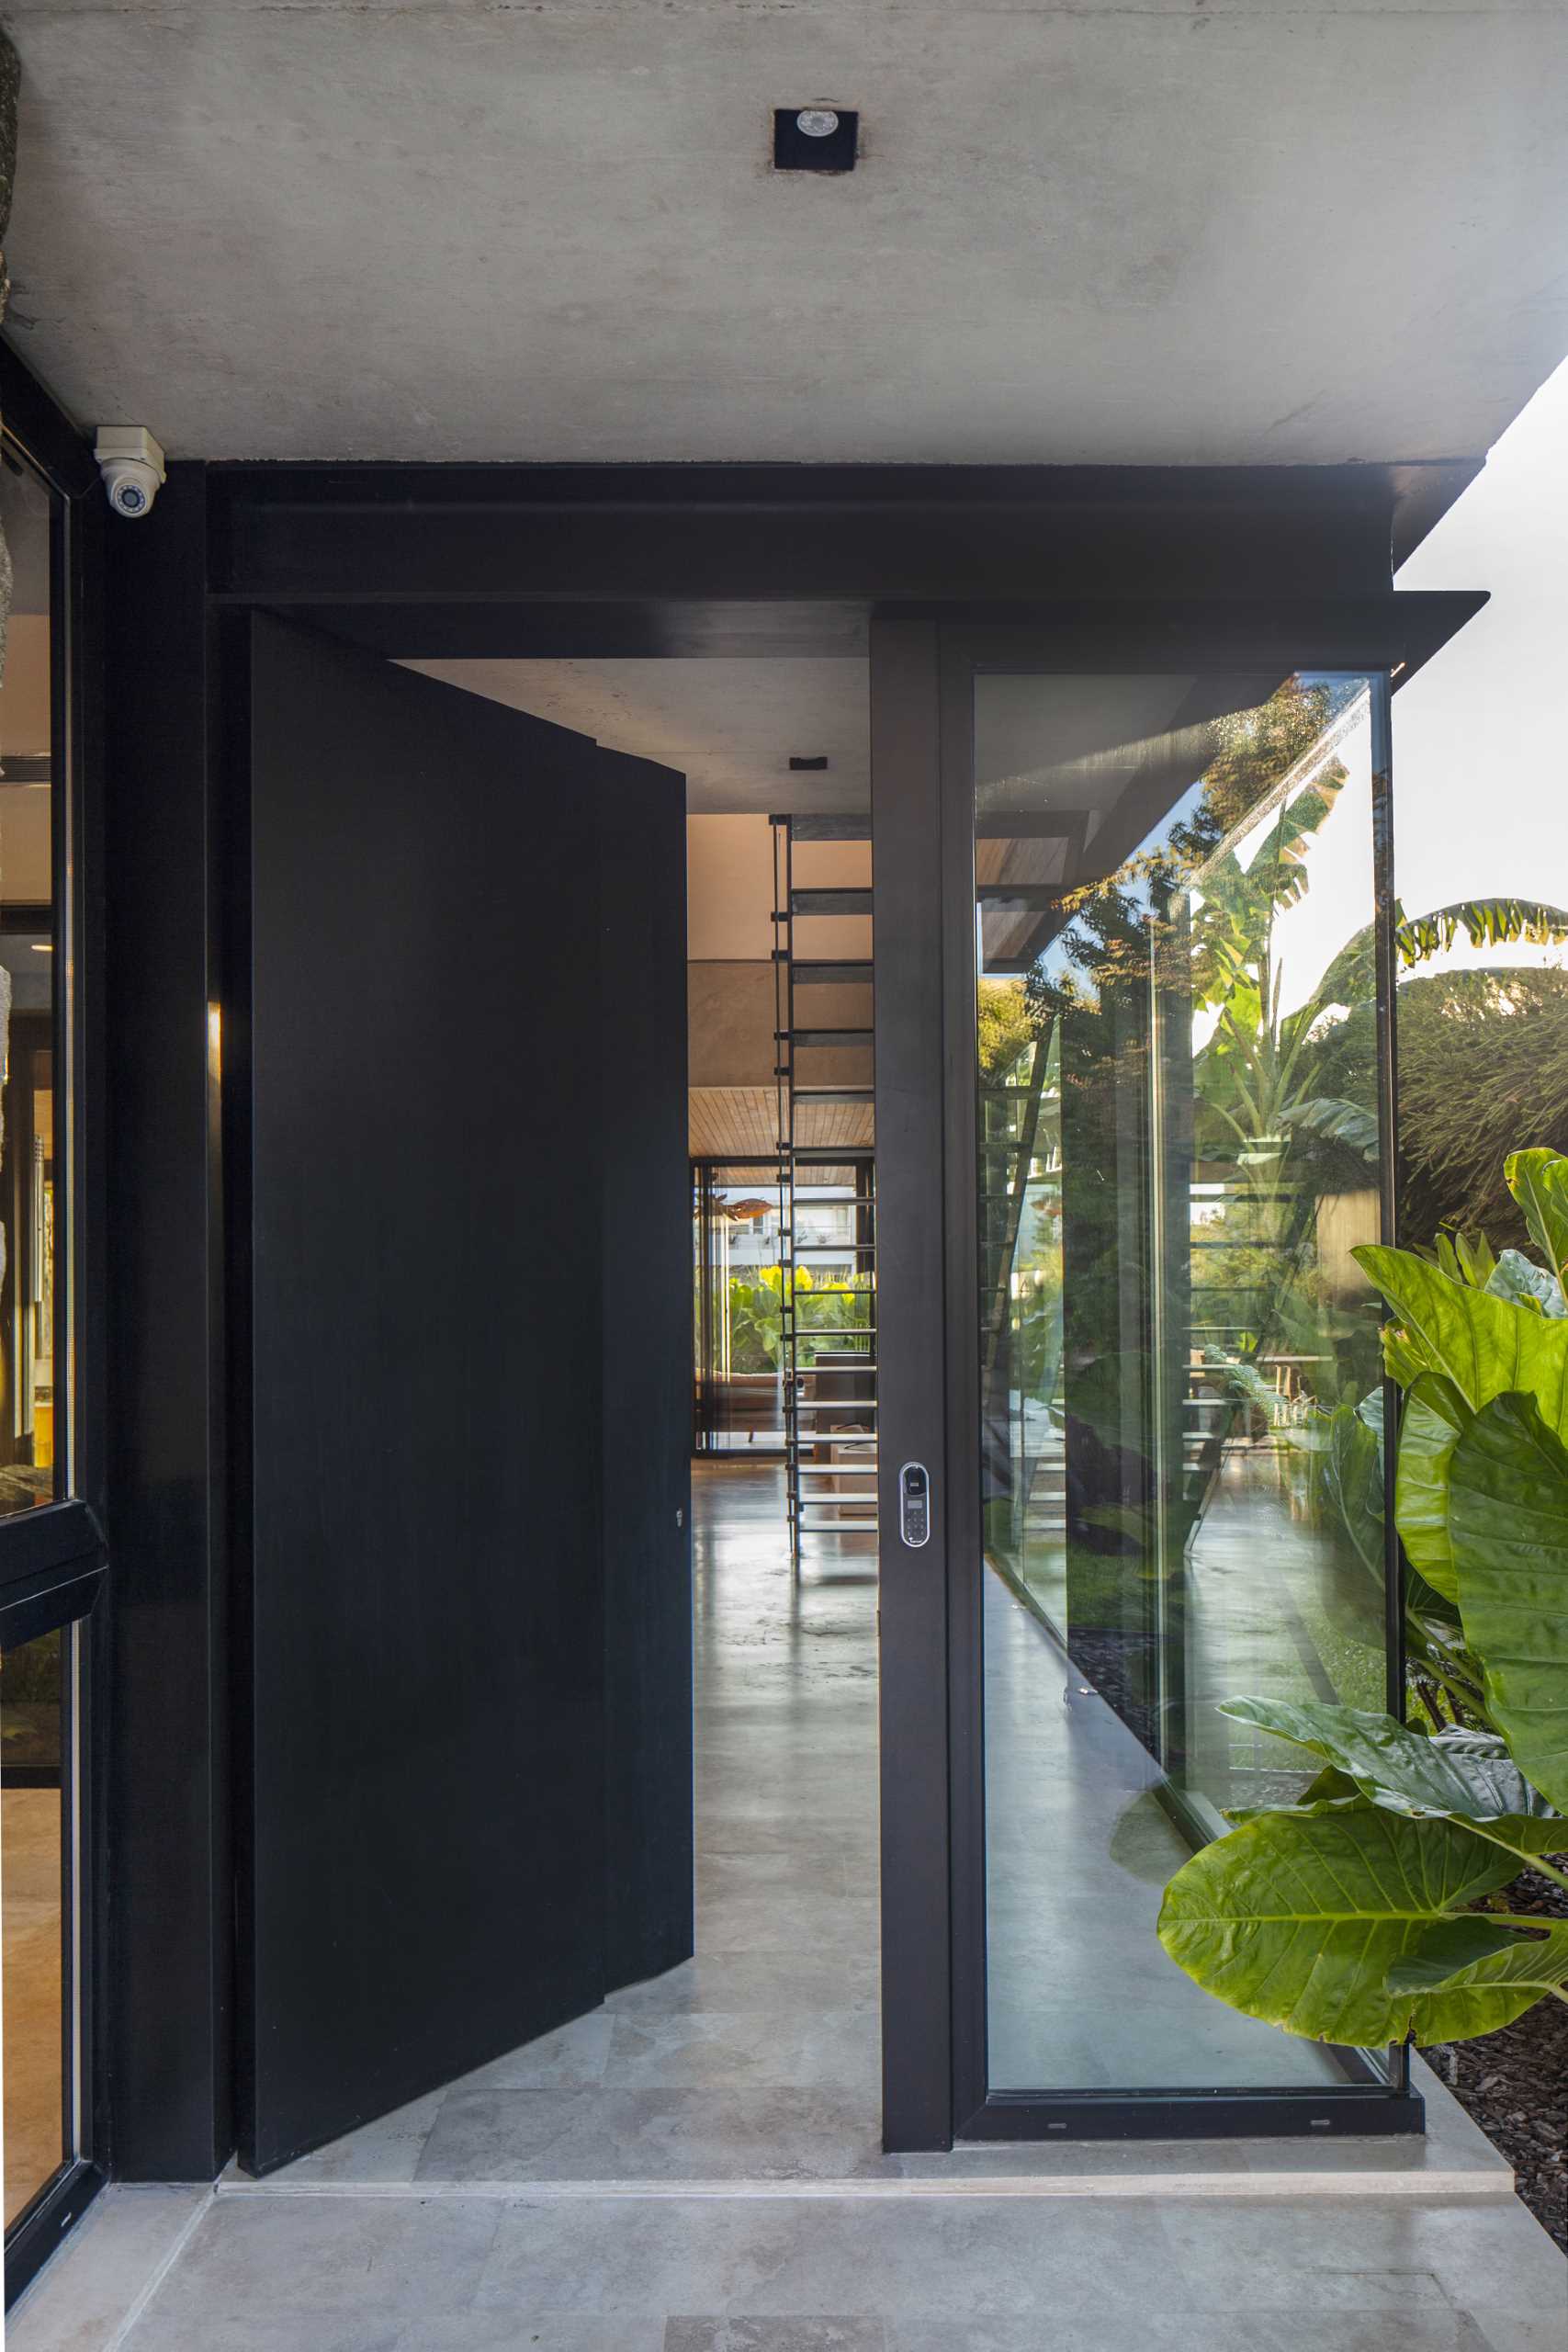 A modern home with a black front door that has windows on either side to provide a glimpse of the interior.